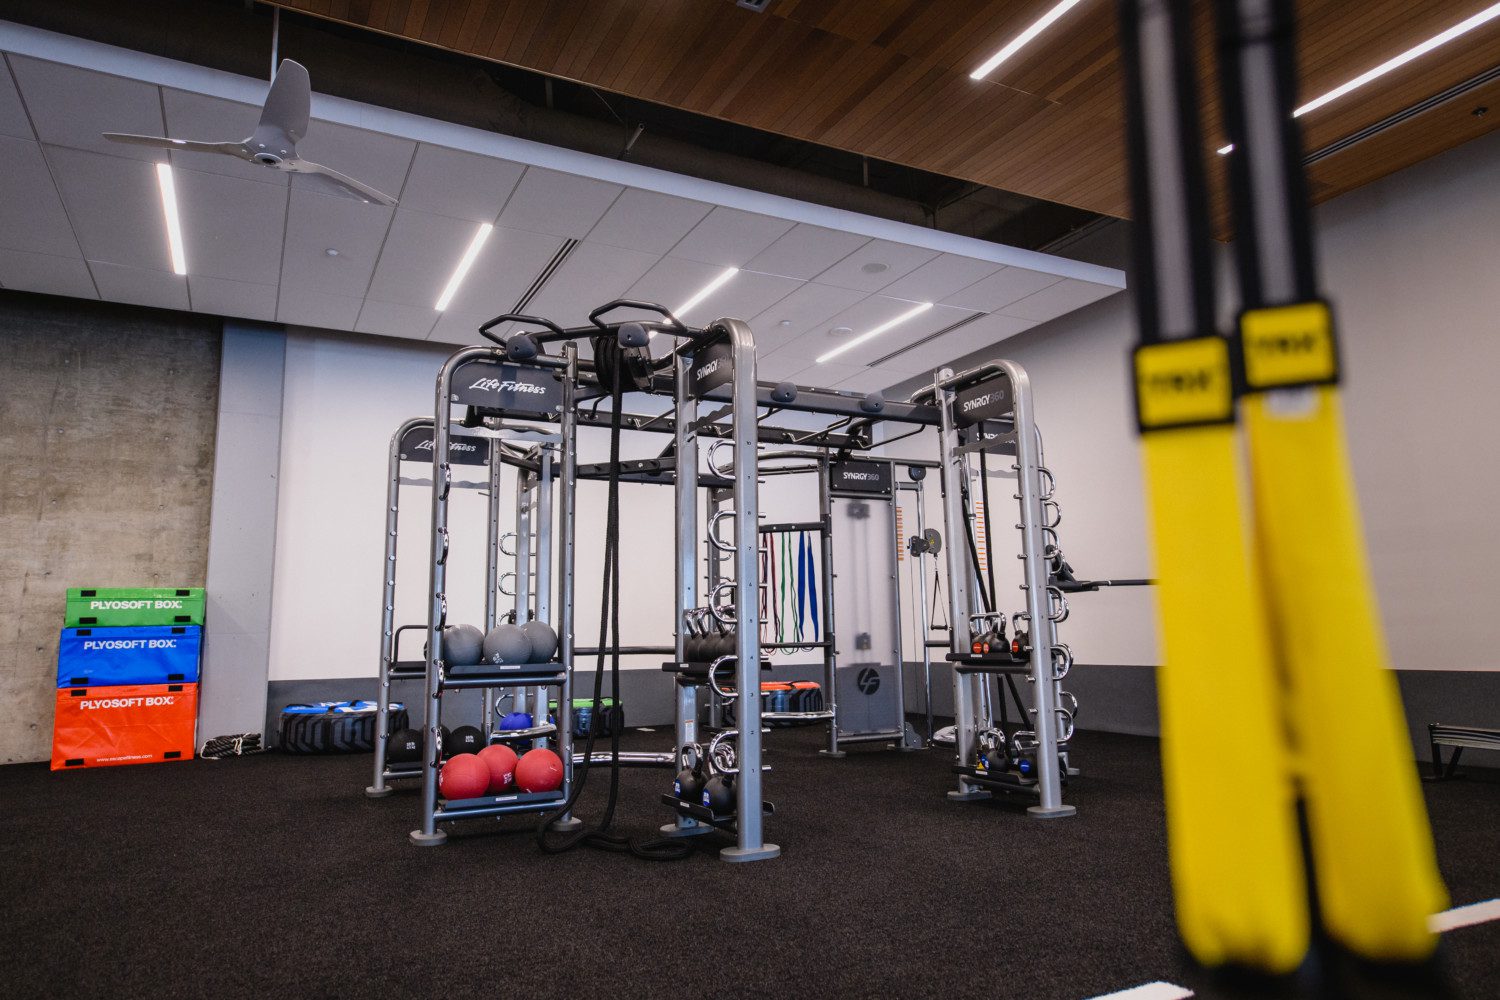 Image of the plyometric area in Douthit Hills Fitness Center